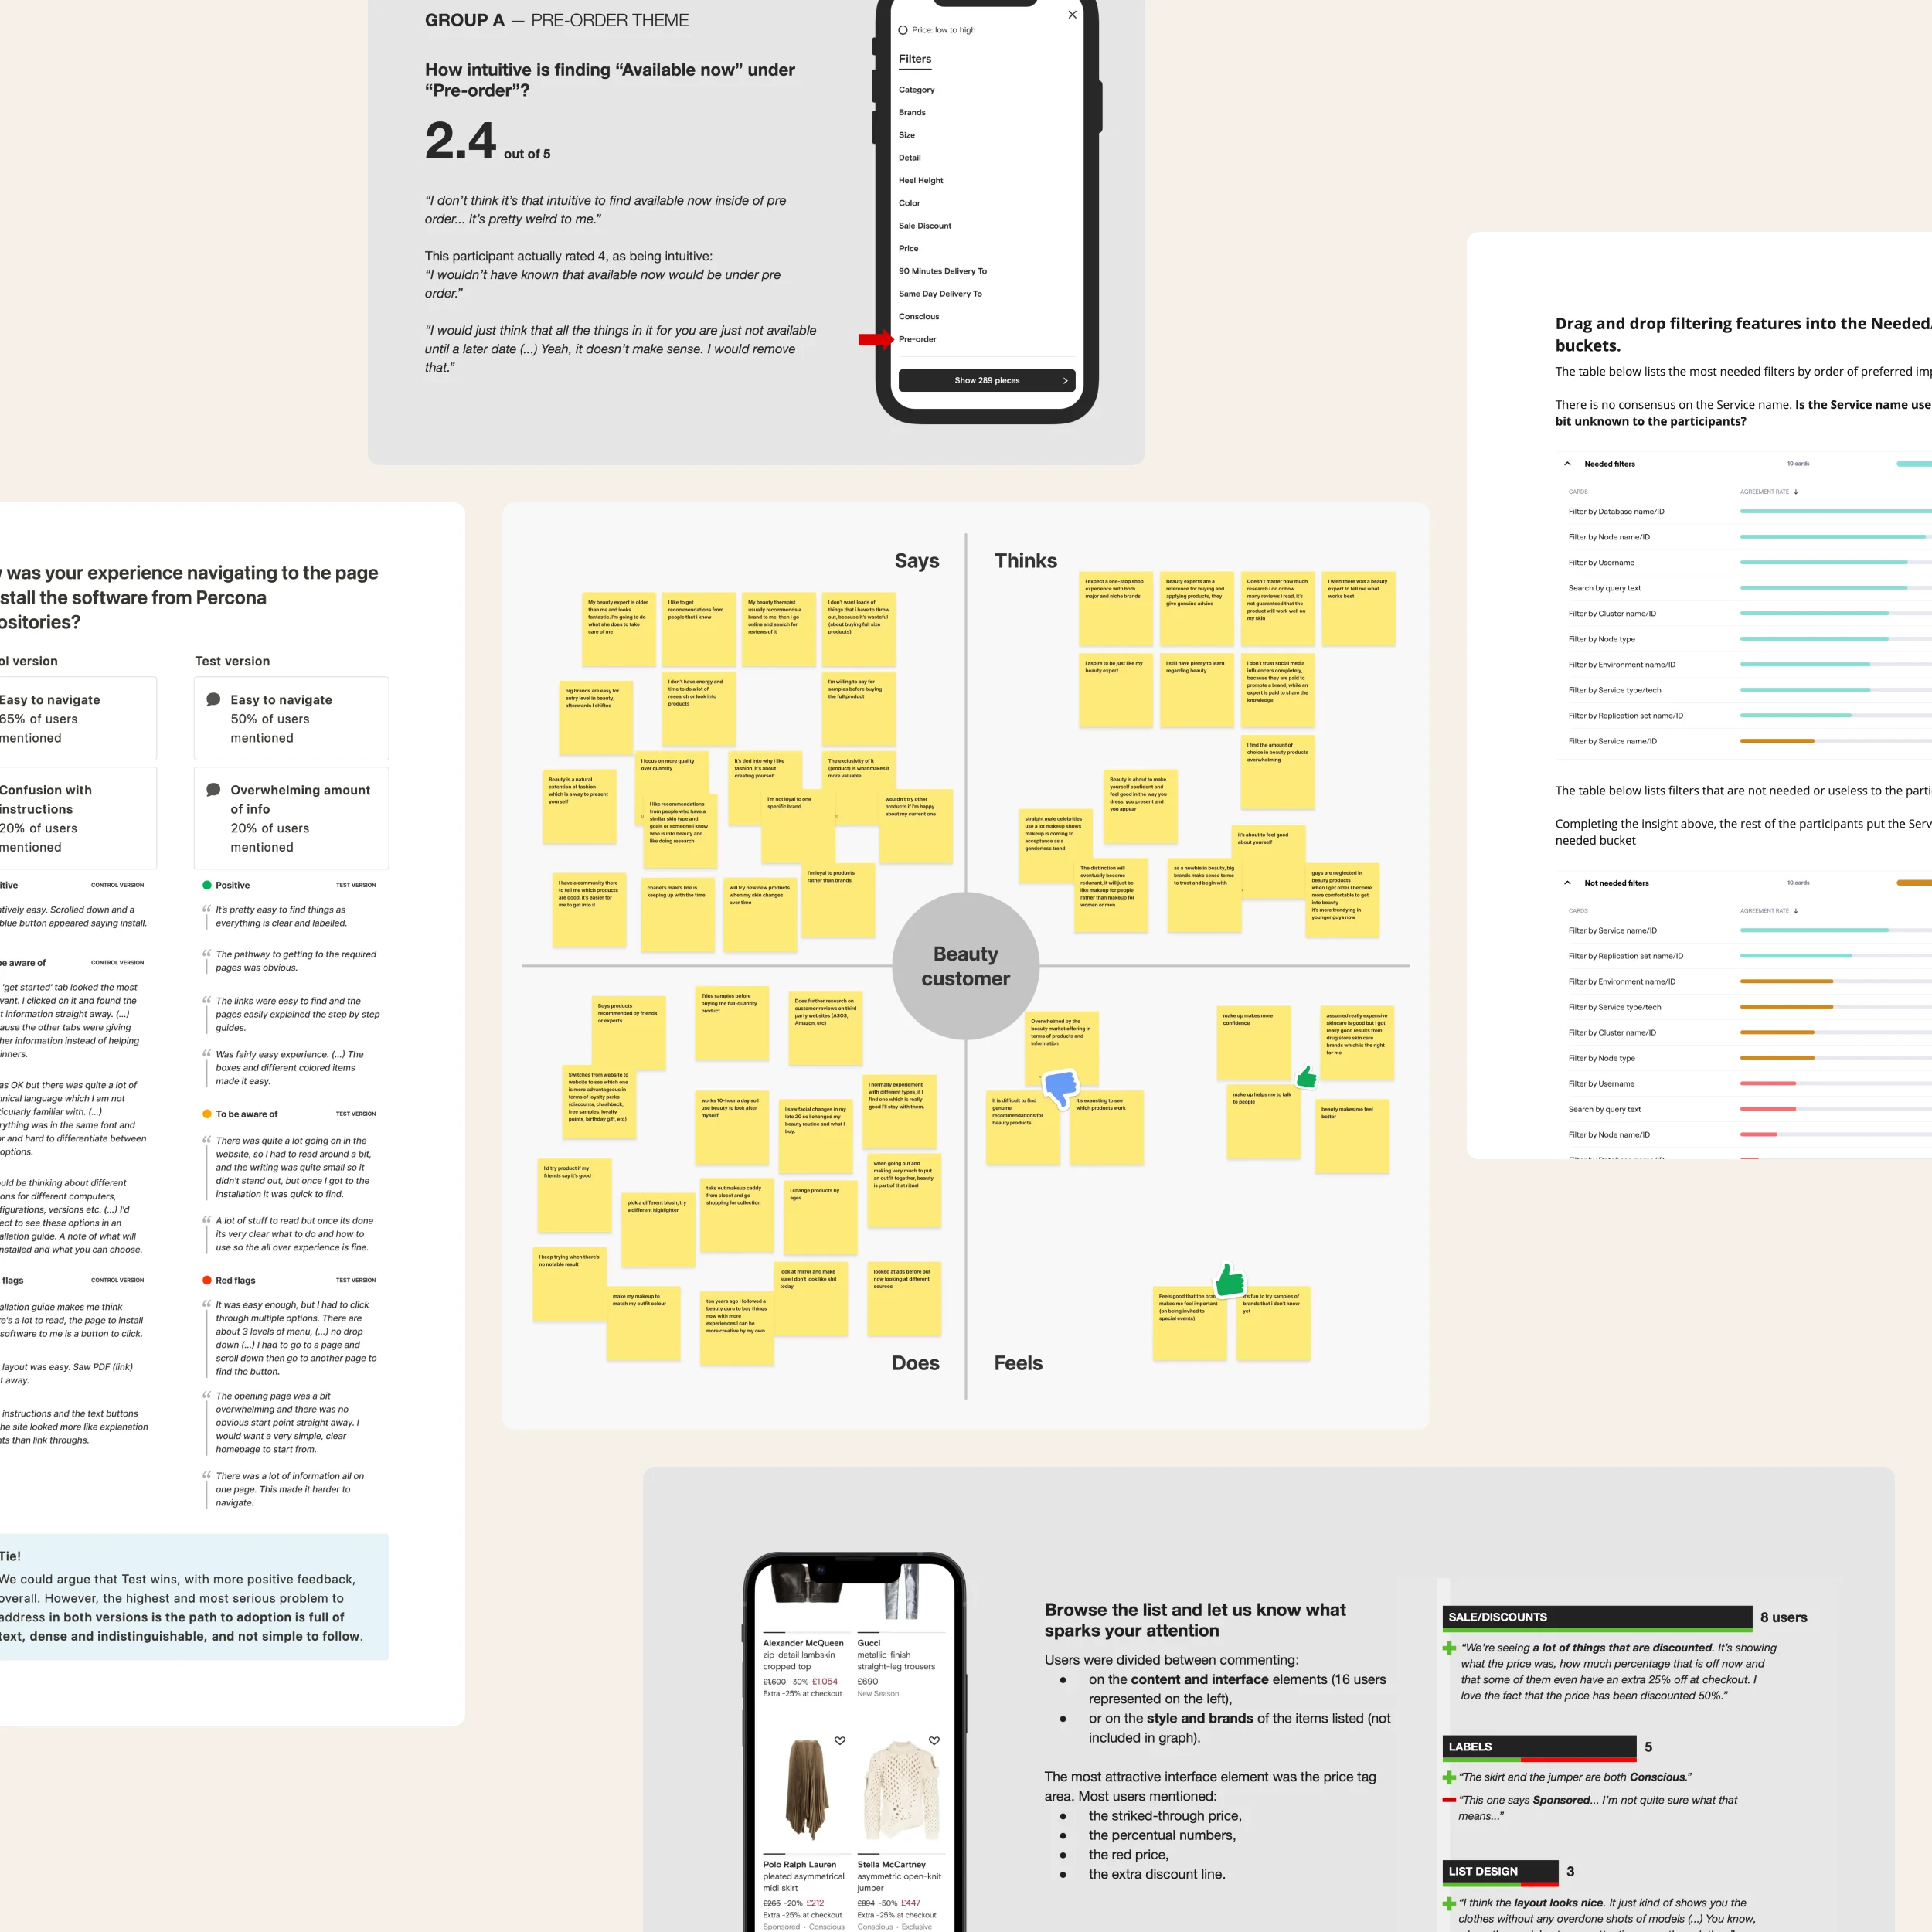 Screenshots of documentation pages, presentation slides, and whiteboard diagrams with post-its.